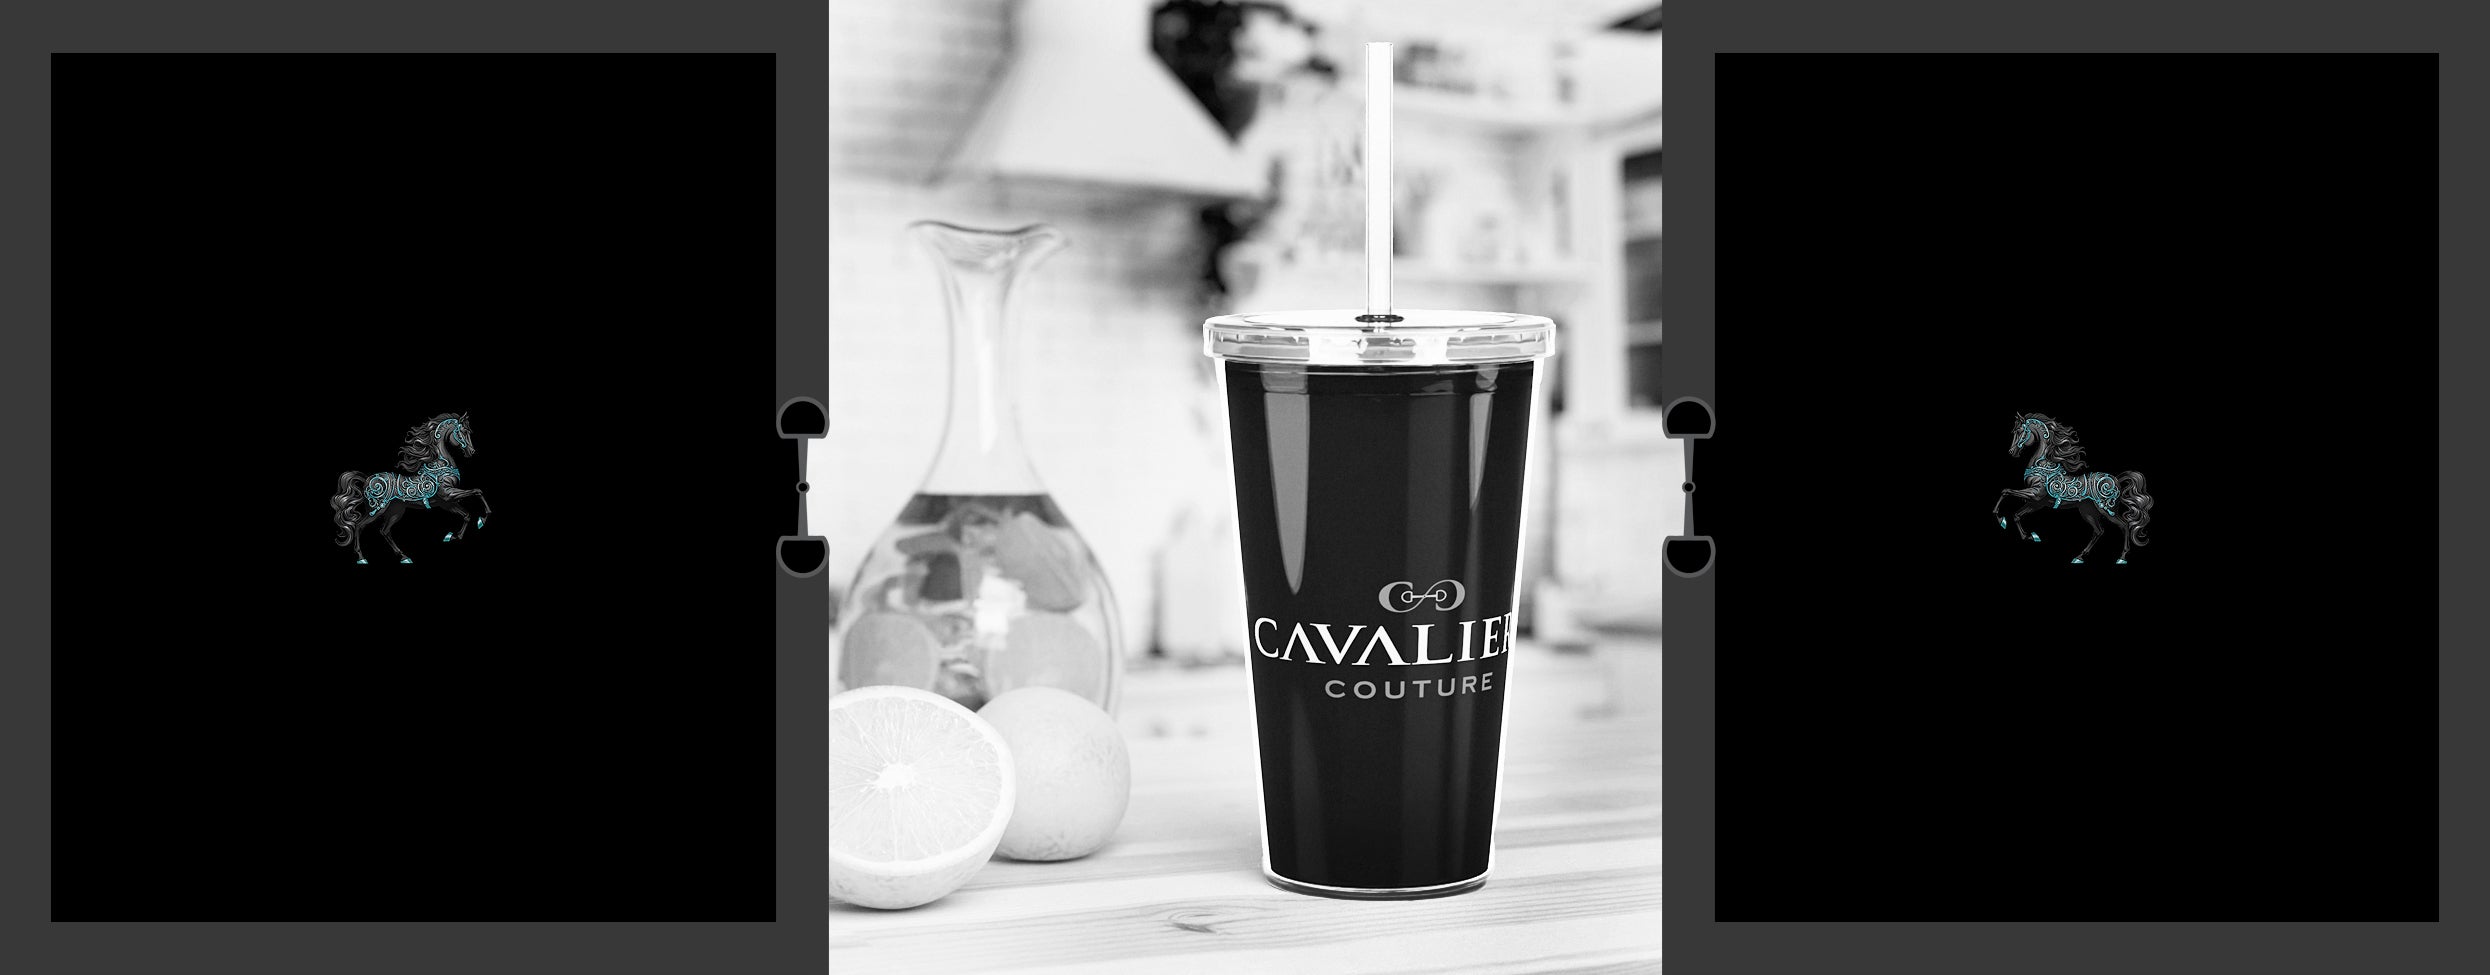 Cavaliere Couture Home Goods